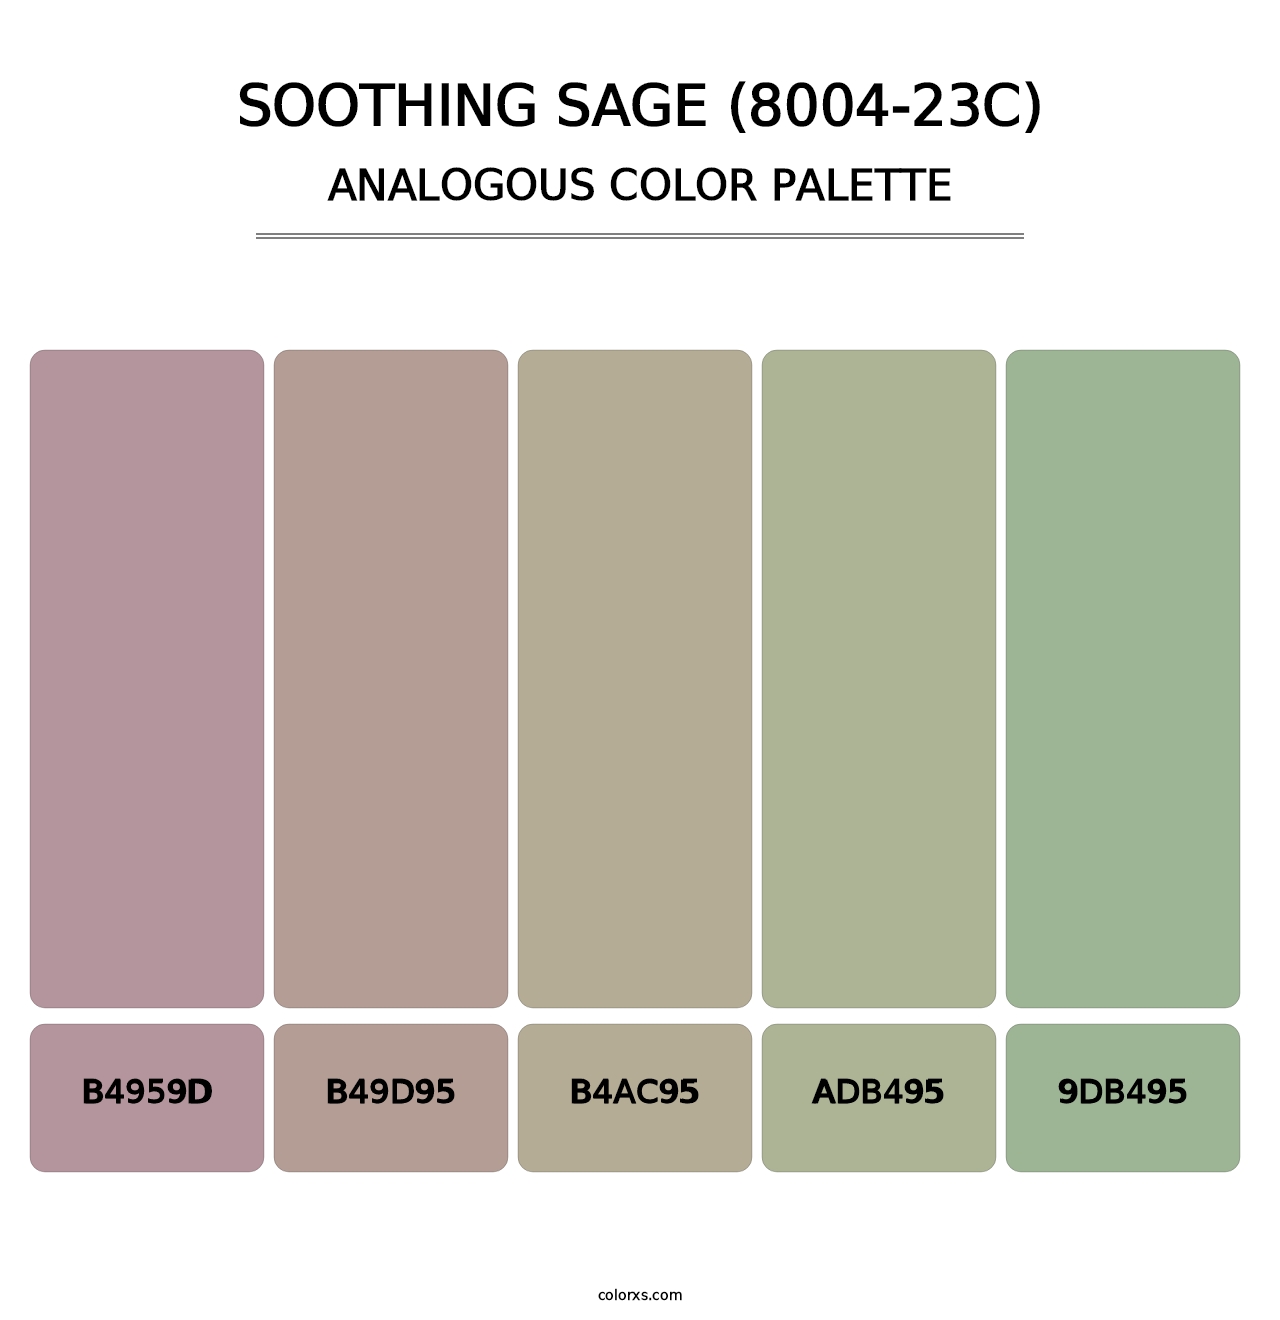 Soothing Sage (8004-23C) - Analogous Color Palette